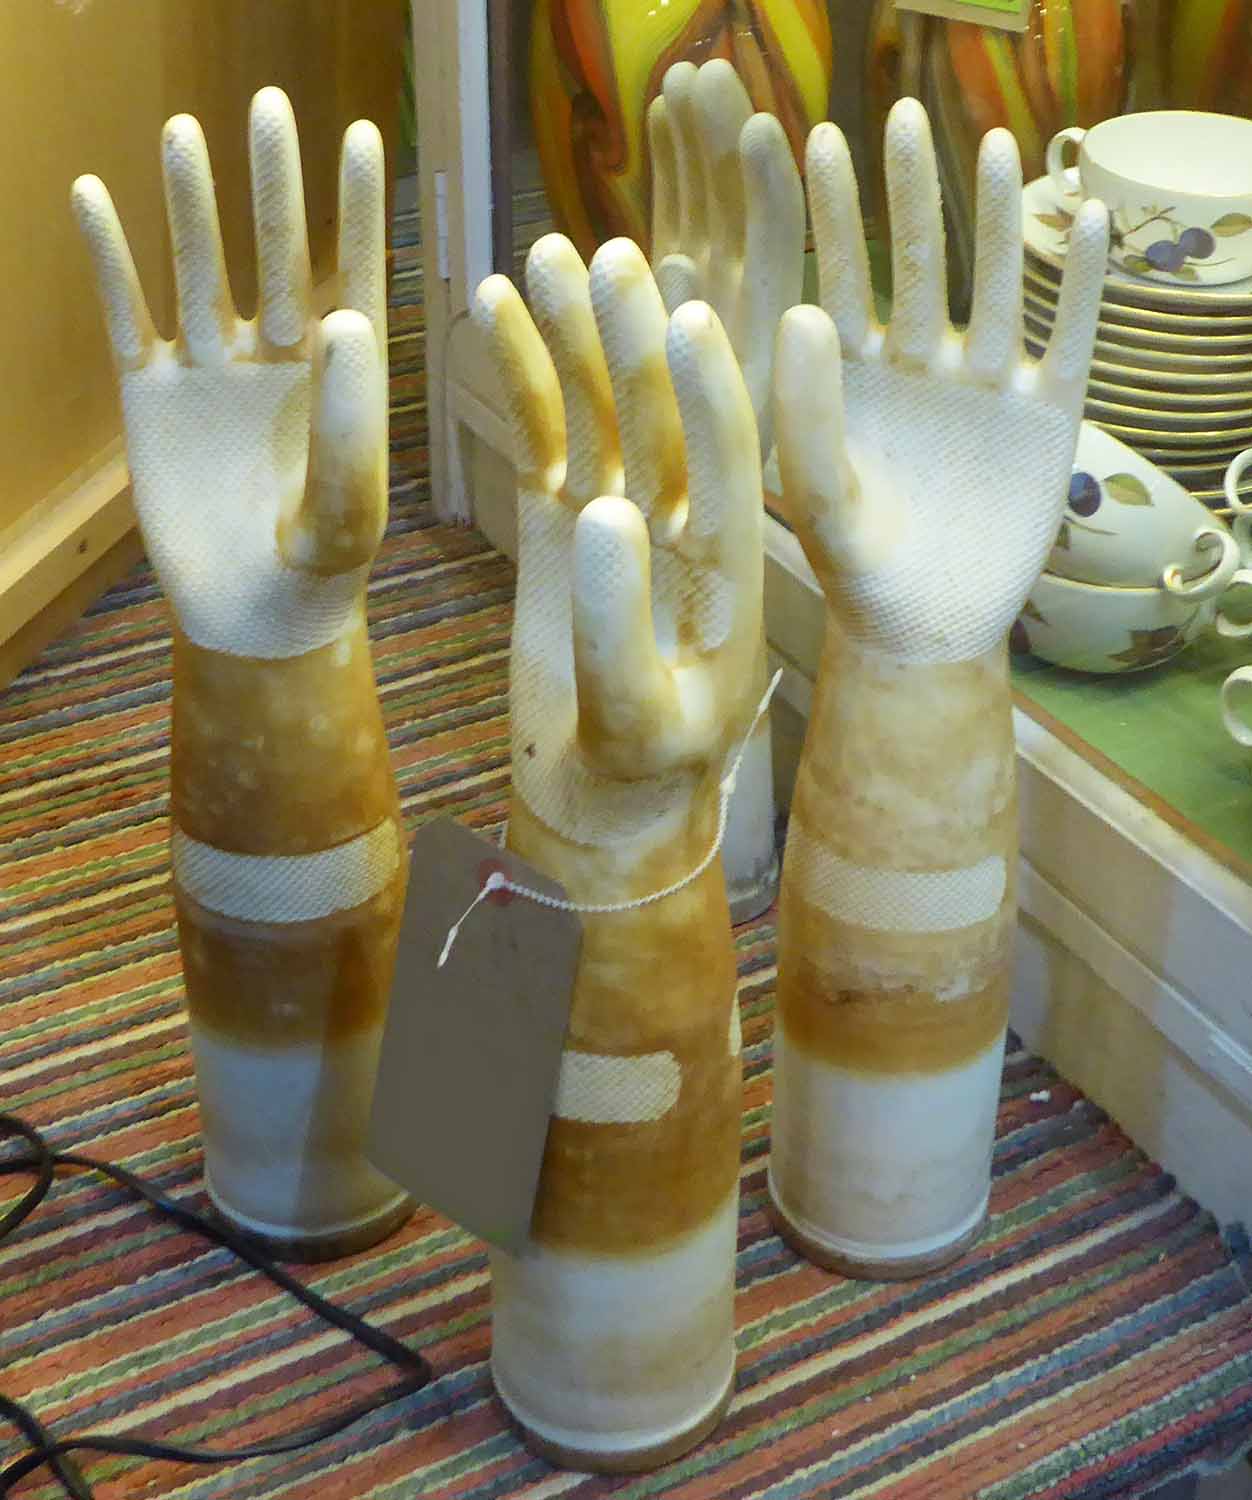 SPANISH FACTORY RUBBER GLOVE MOULD BLOCKS, a set of four, mid 20th century porcelain,